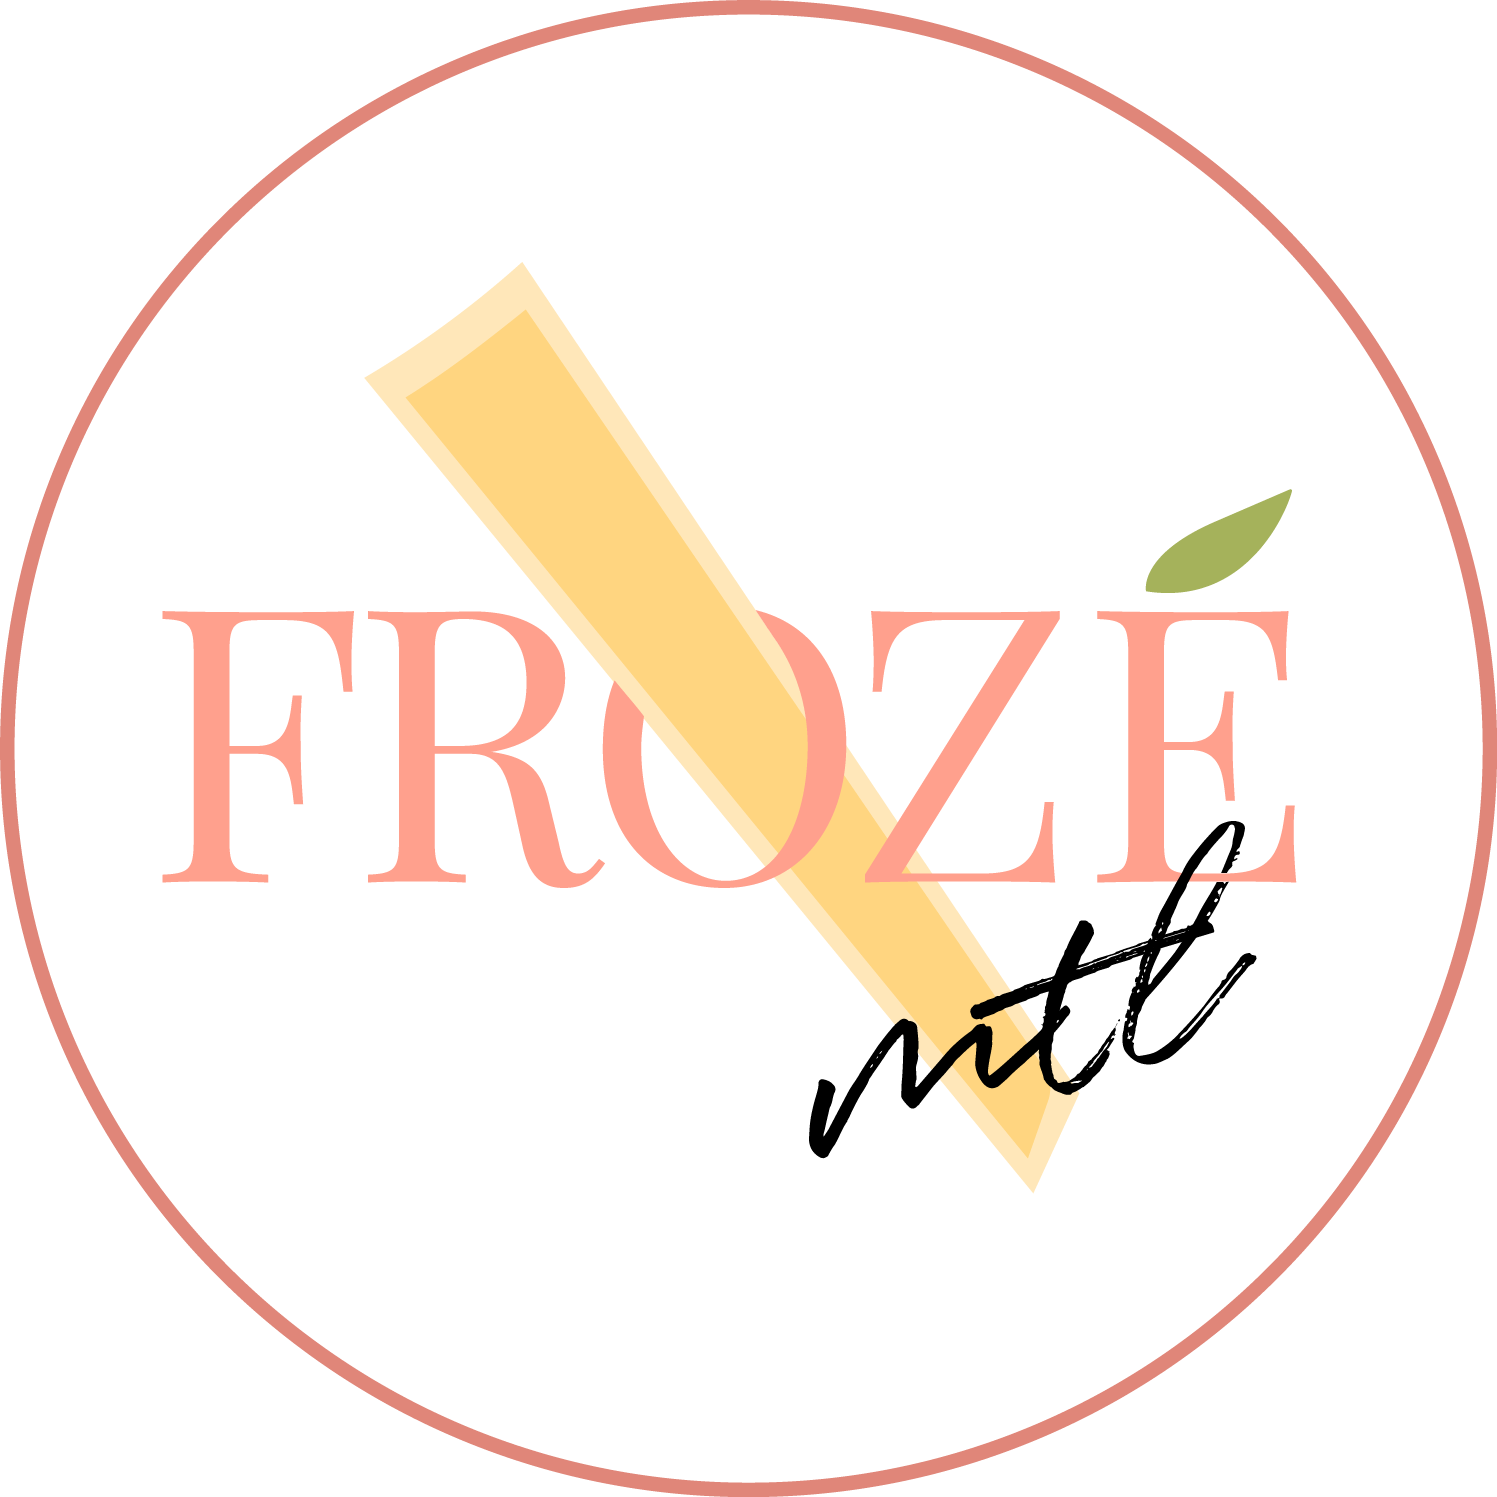 Logo for a freezie business pronounced FRO ZAY, there is a freezie through the 